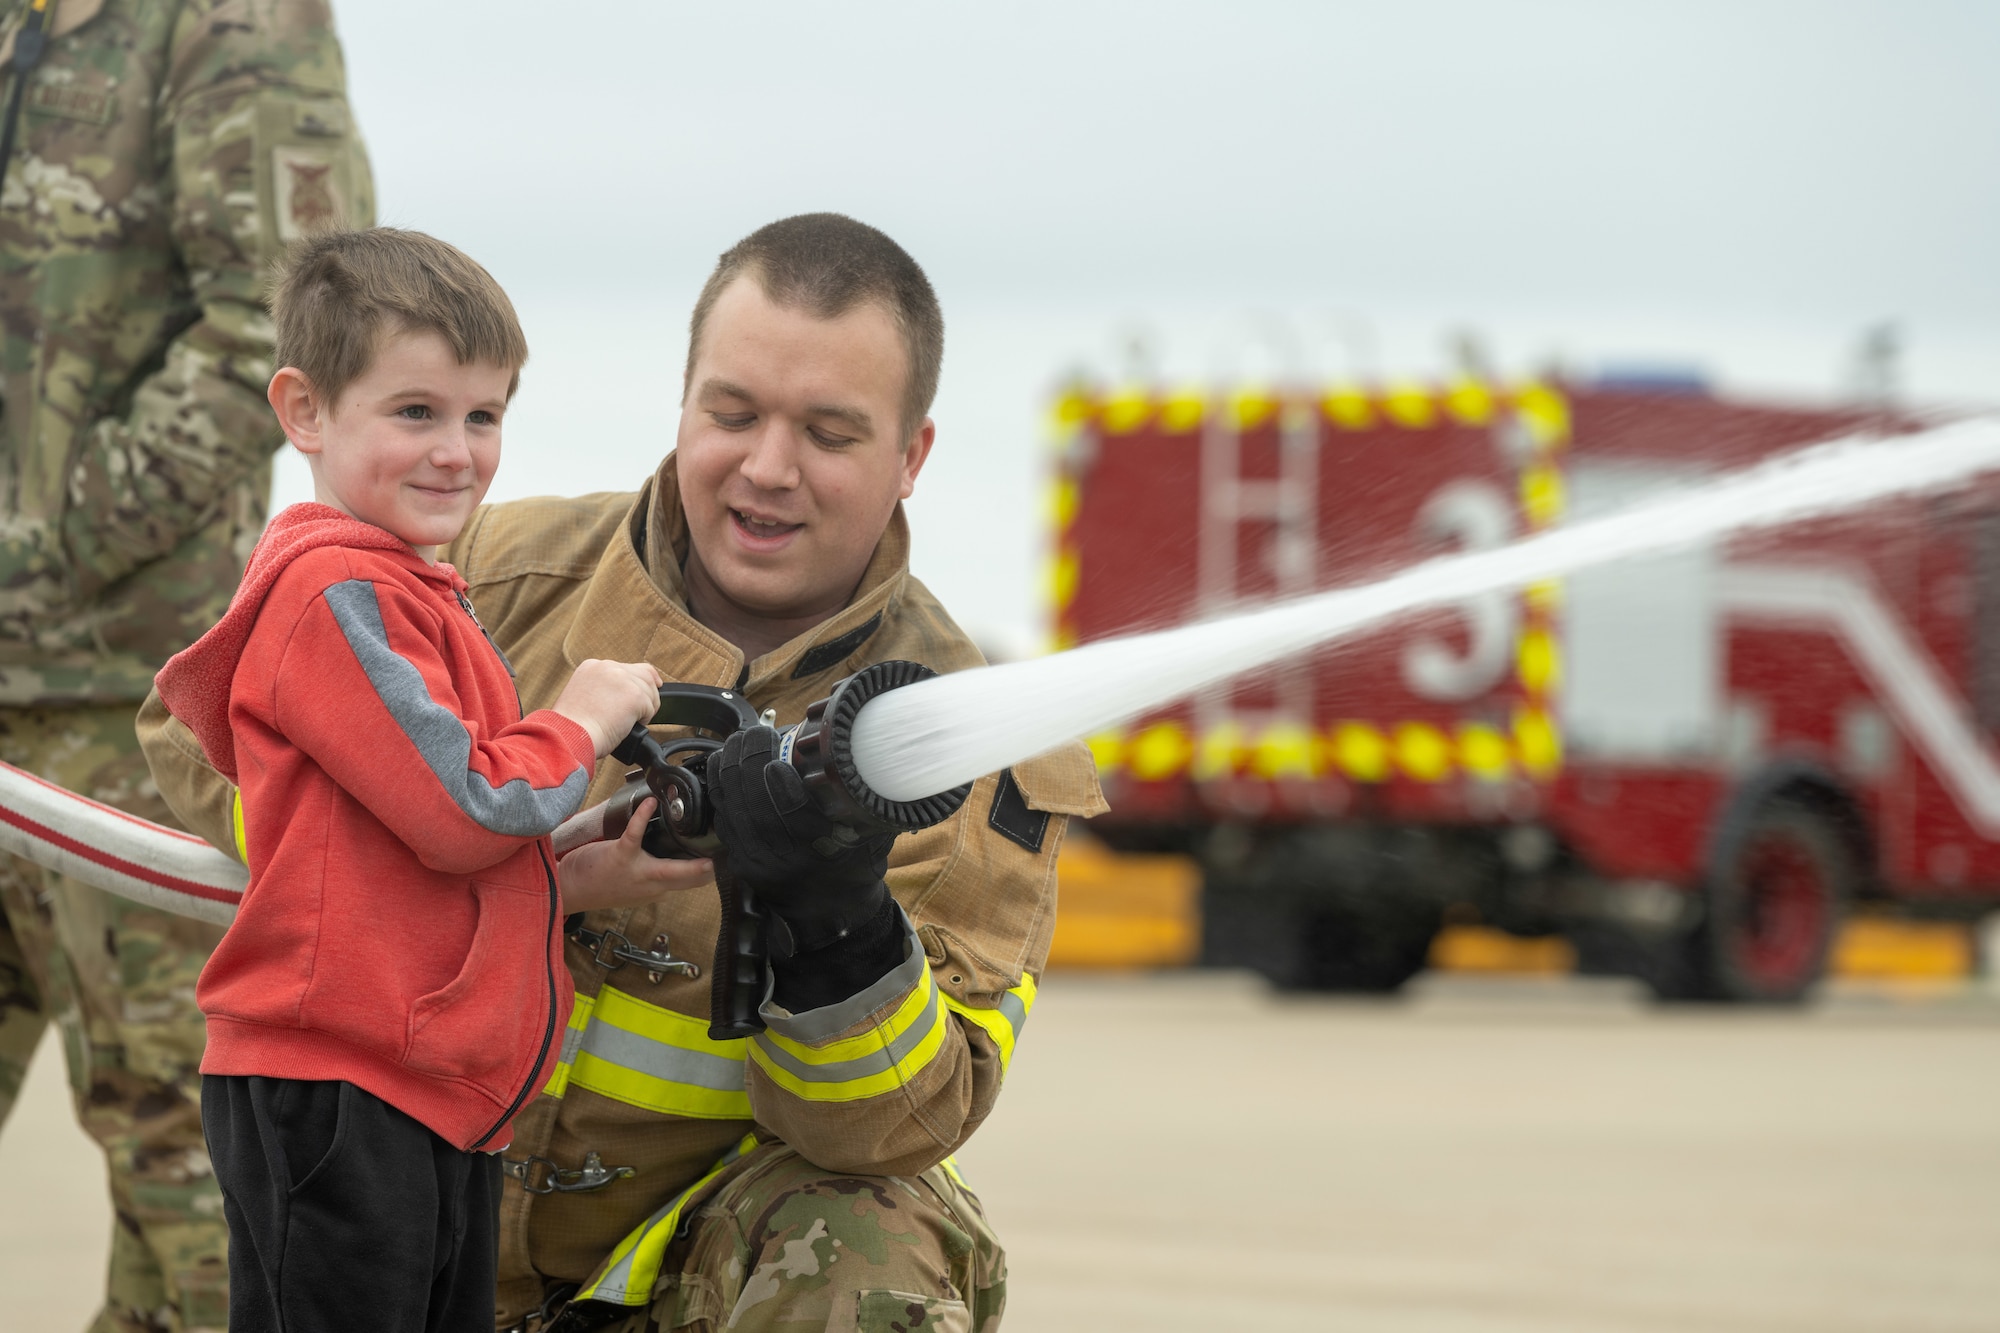 Fire protection specialists assigned to the 509th Civil Engineering Squadron conduct a training demonstration for a group of kindergarteners from Whiteman Elementary School during a base field trip on Whiteman Air Force Base, Missouri, May 4, 2022. The students toured various facilities on base receiving demonstrations from security forces and the fire department. (U.S. Air Force photo by Airman 1st Class Bryson Britt)